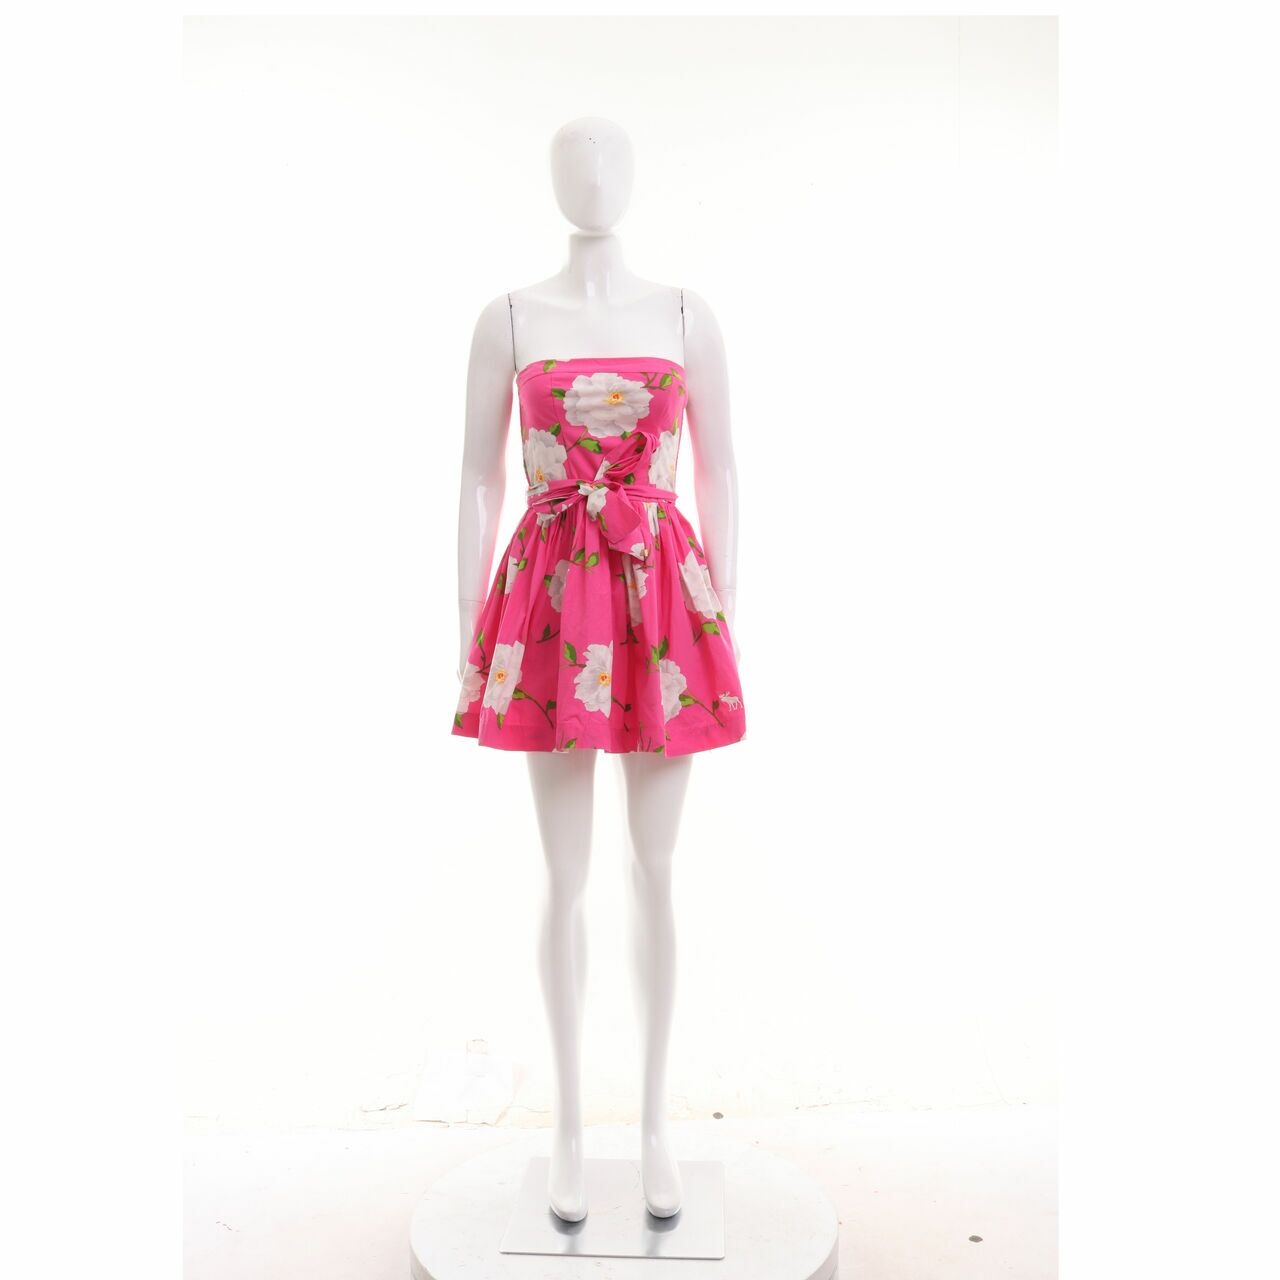 Abercrombie & Fitch Pink Floral Tube Mini Dress